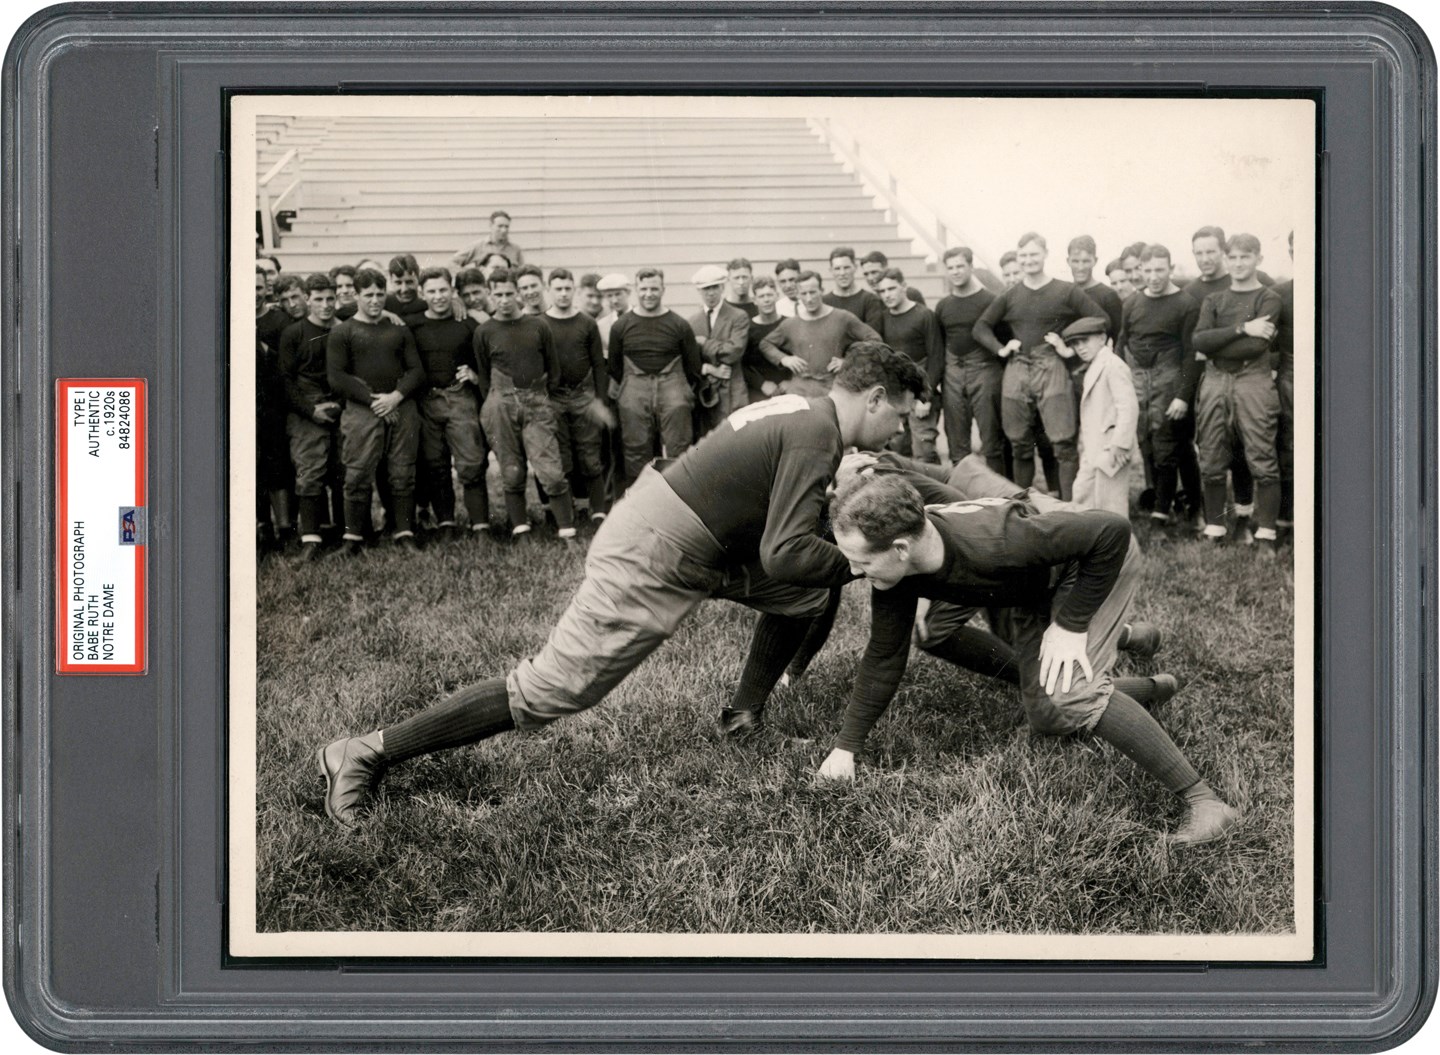 Vintage Sports Photographs - Babe Ruth On the Gridiron at Notre Dame Photograph (PSA Type I)